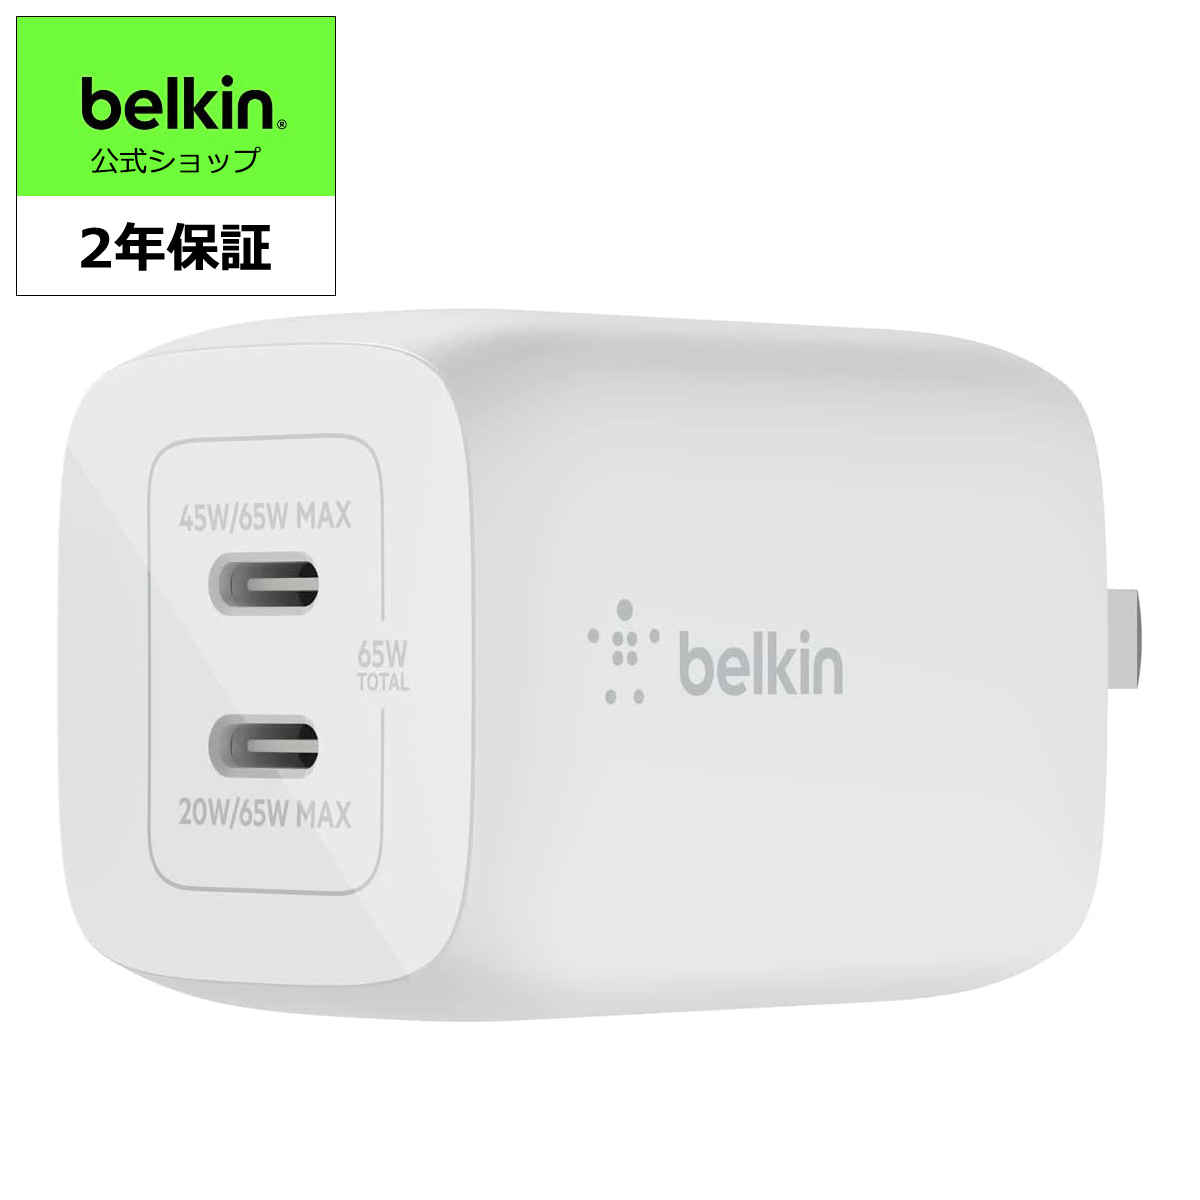 Belkin GaN充電器 USB-C 2ポート 45W(25W/45W 20W/45W) PD3.0急速充電 PPS対応  折りたたみ式プラグ iPhone 14/13/12 MacBook Pro/iPad/Windows PC/Surface Pro/ Androidスマホ・タブレット各種対応 BOOST↑CHARGE Pro WCH011dqWH Belkin公式ショップ